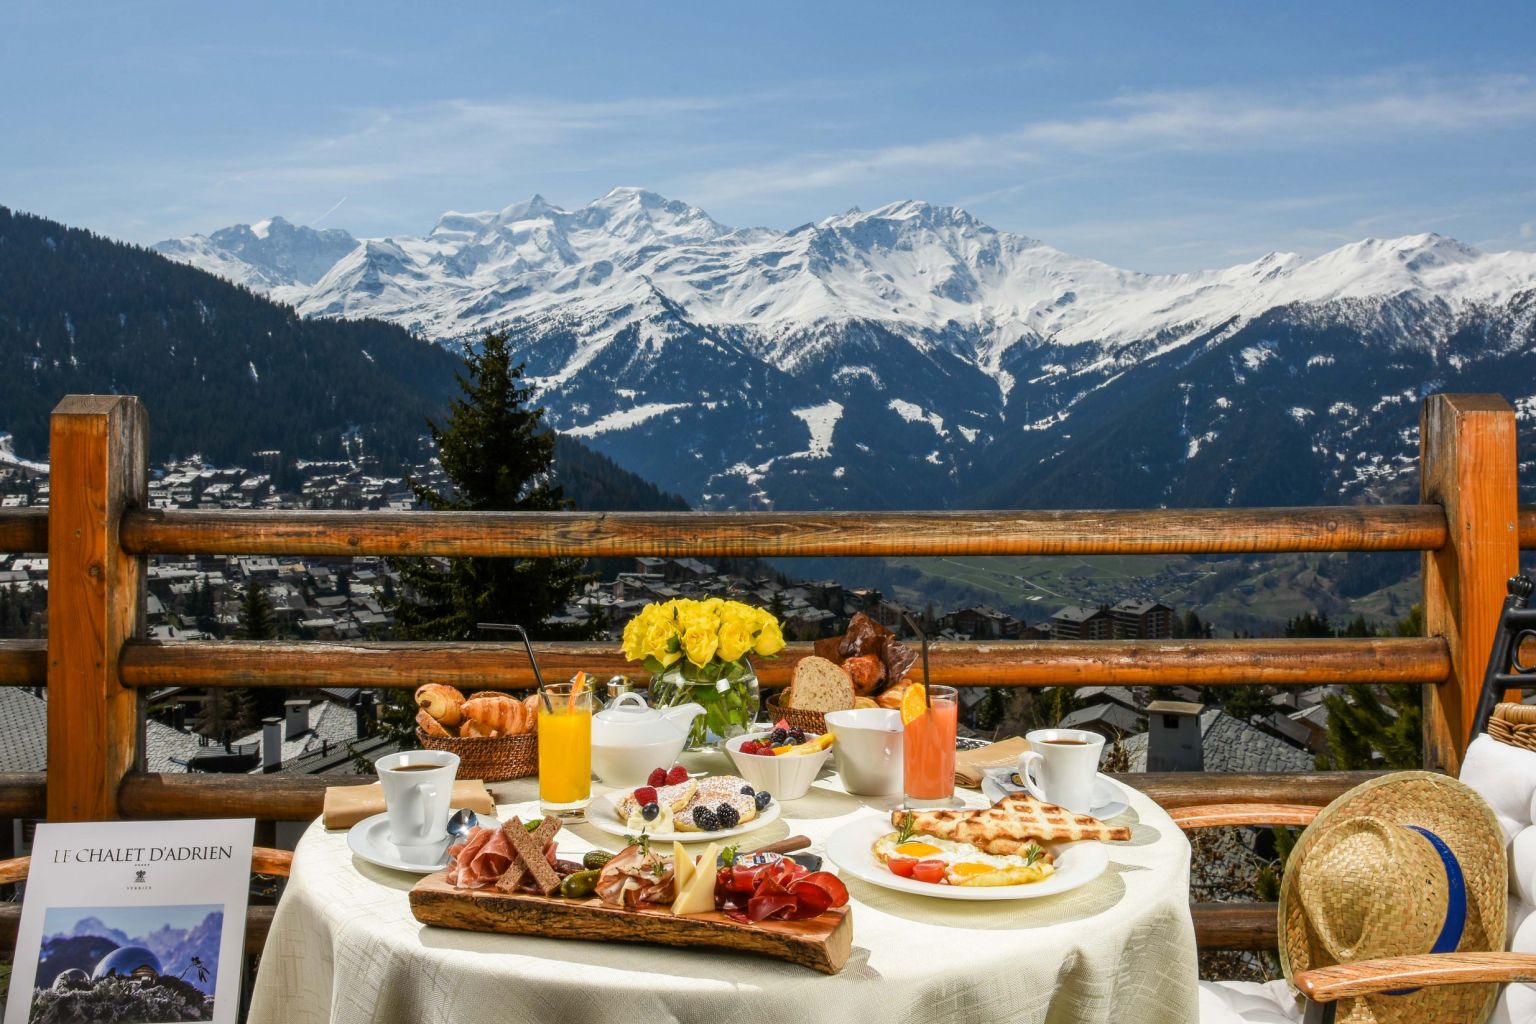 Brunch at the Chalet d'Adrien in Verbier on the terrace with a magnificent view of the mountains. Valais Switzerland